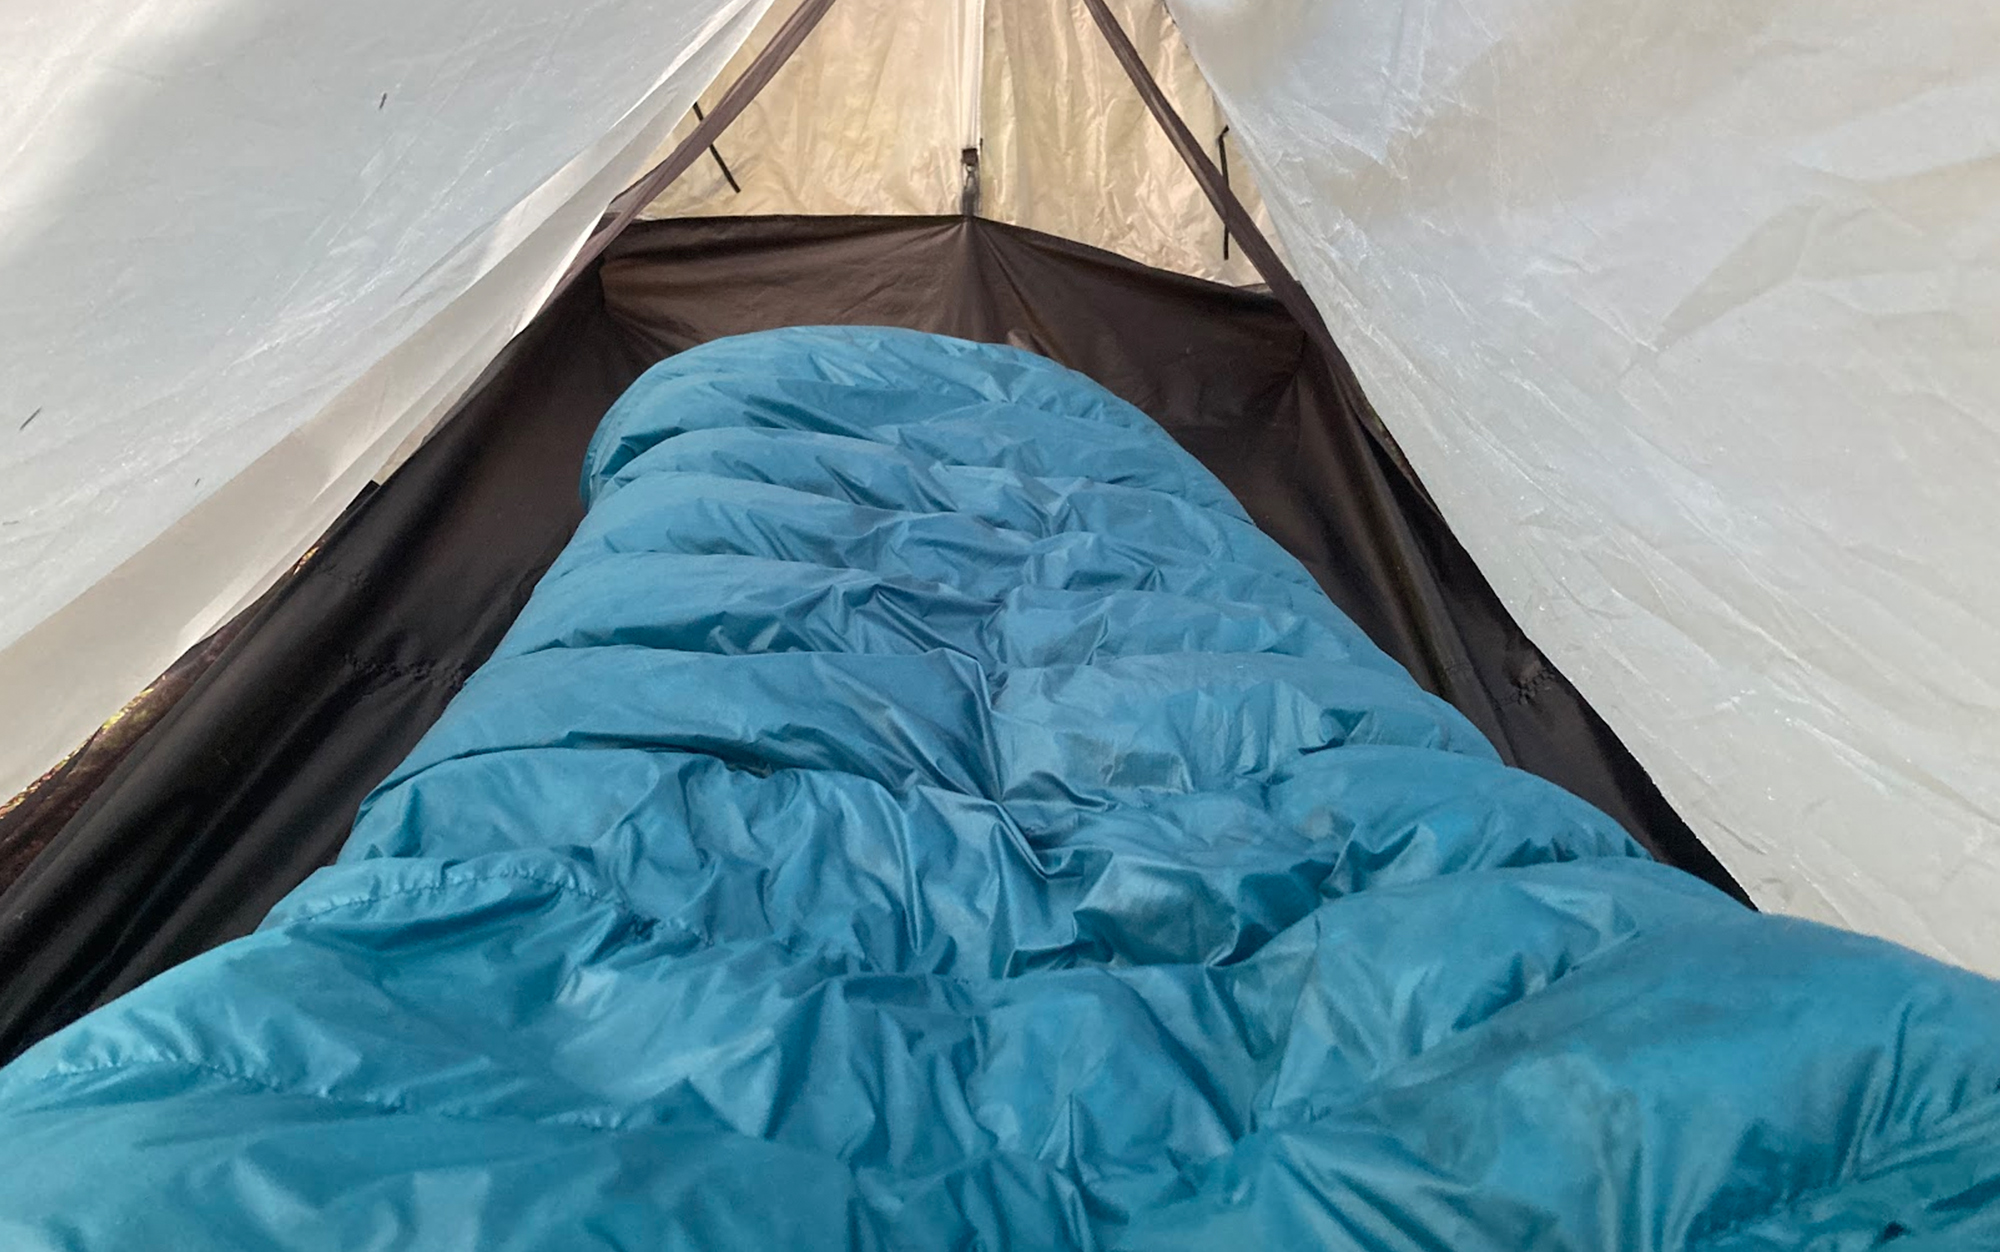 The Katabatic Gear Flex quilt allows for a great deal of temperature control compared to other quilts we looked at, but requires a little more experience to use.